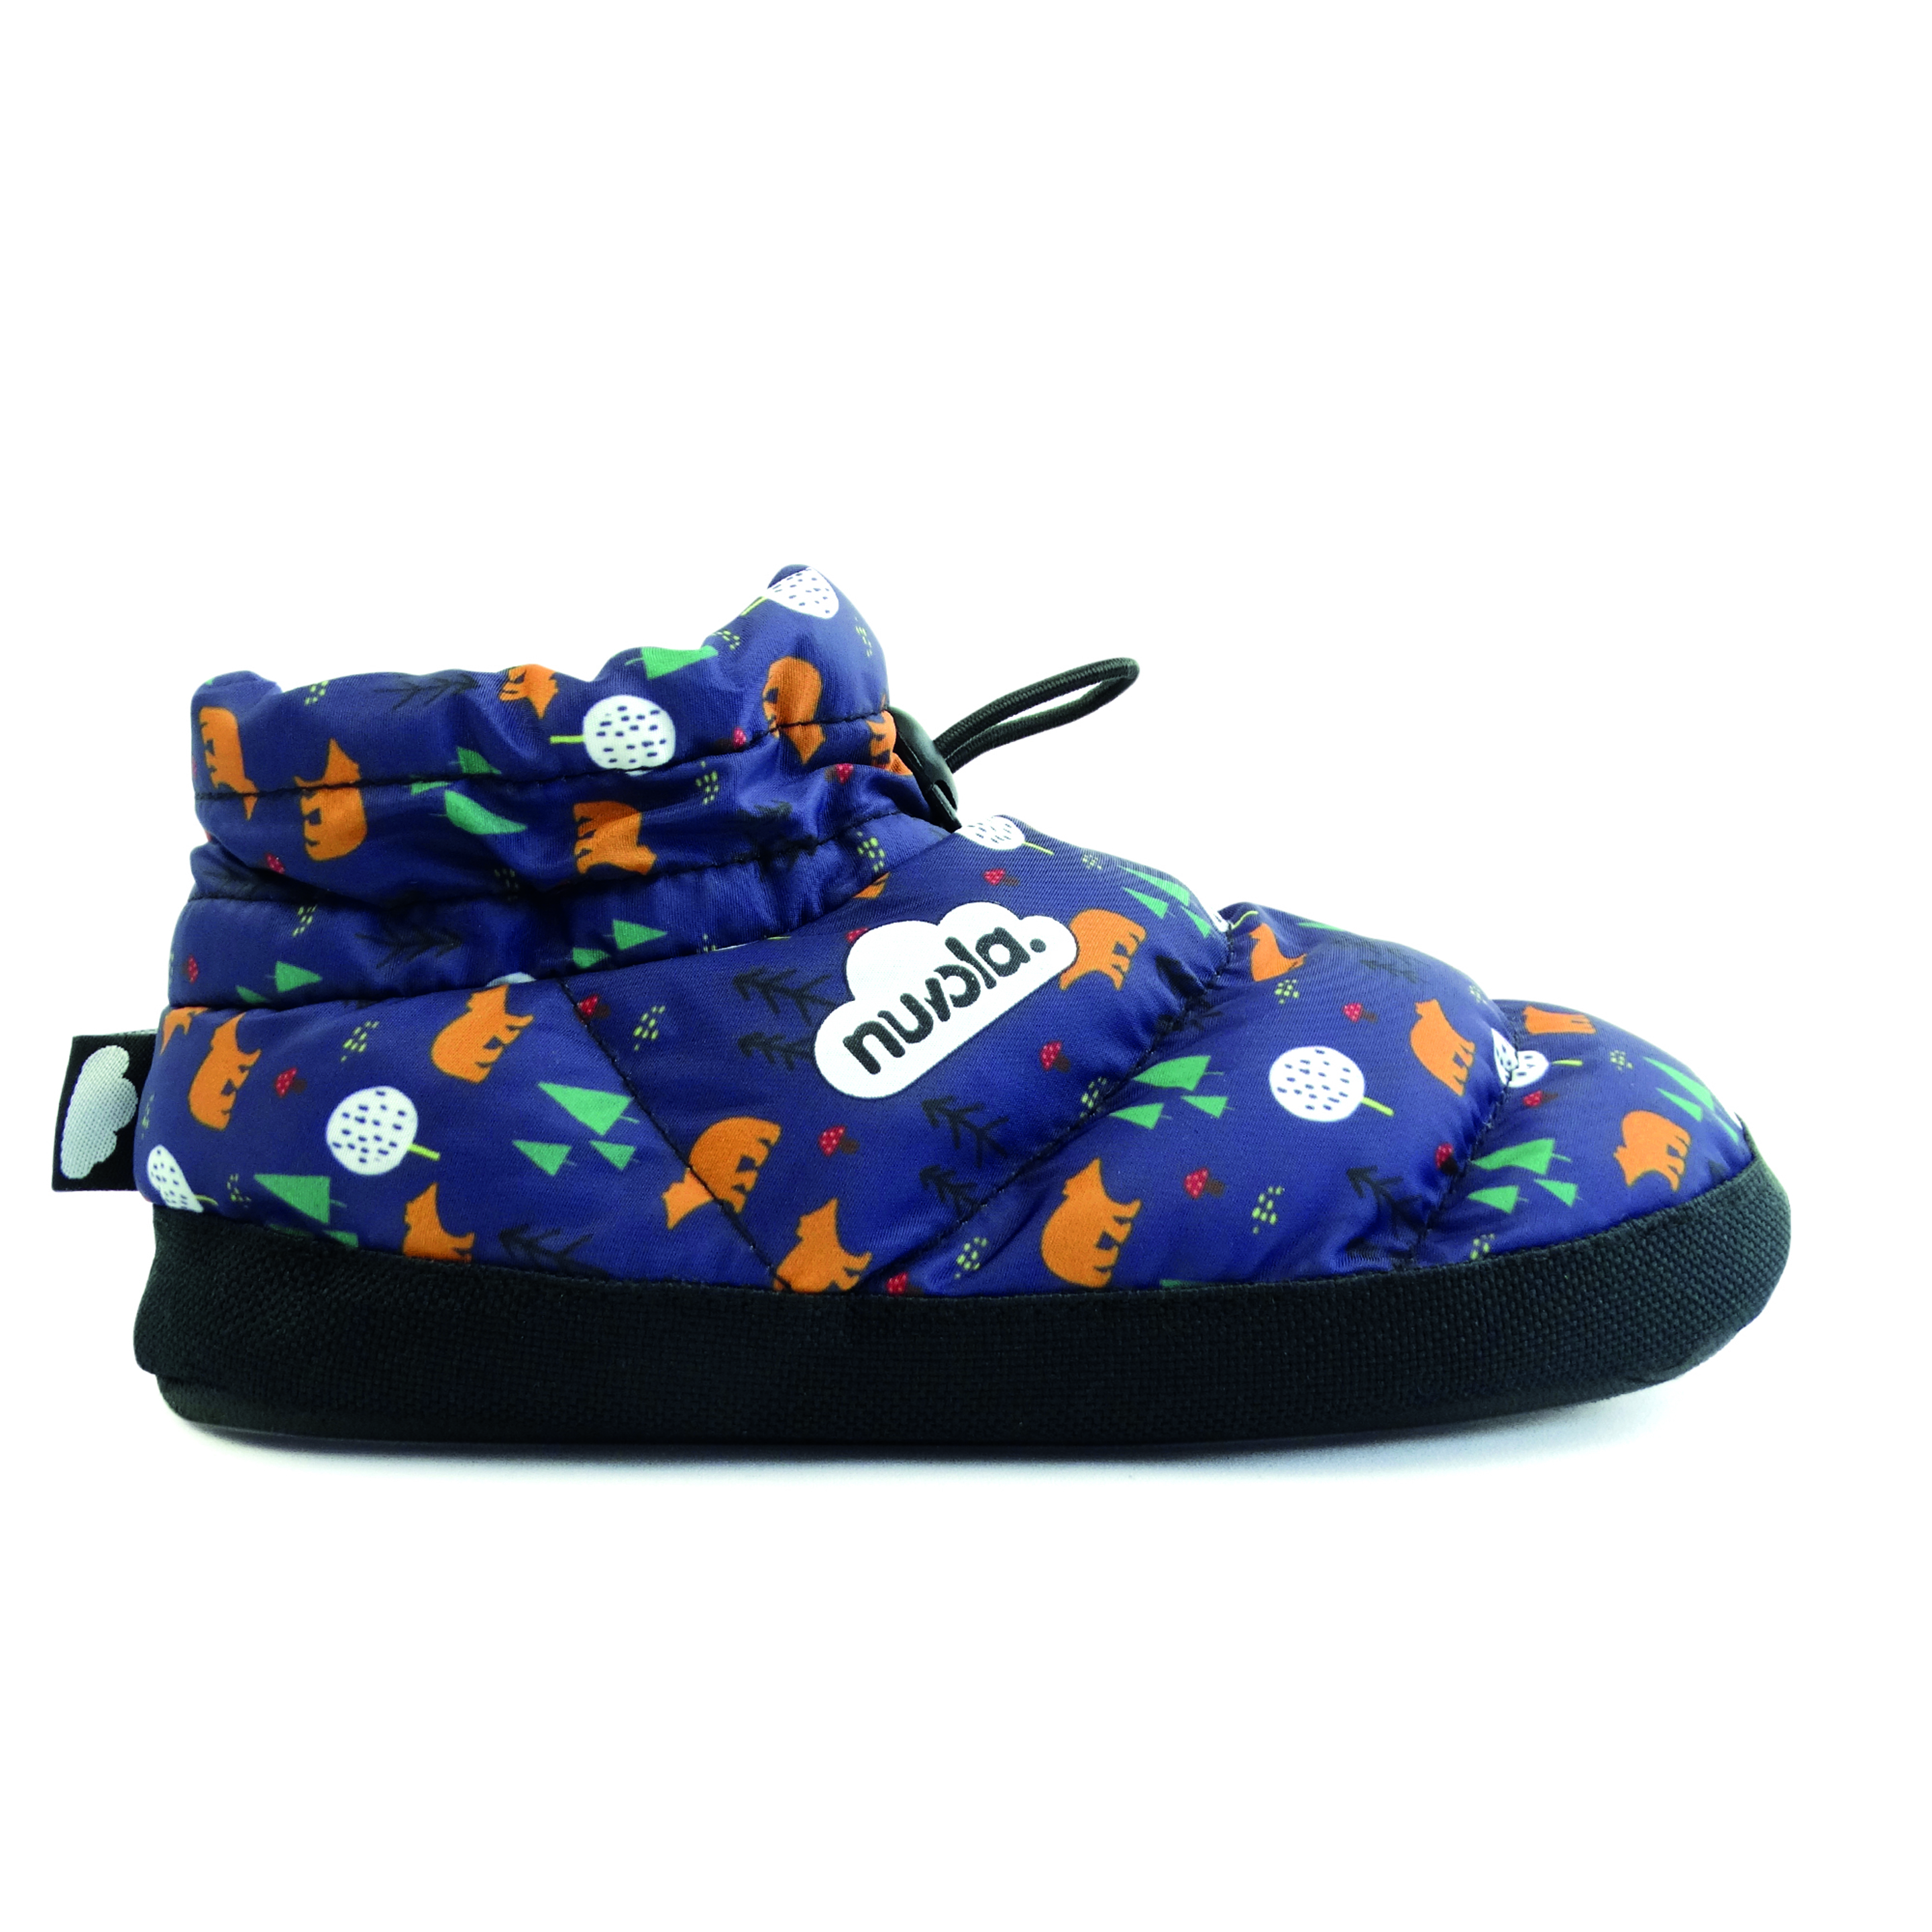 Slippers Camping Nuvola®,boot Home Printed 20 Teddy